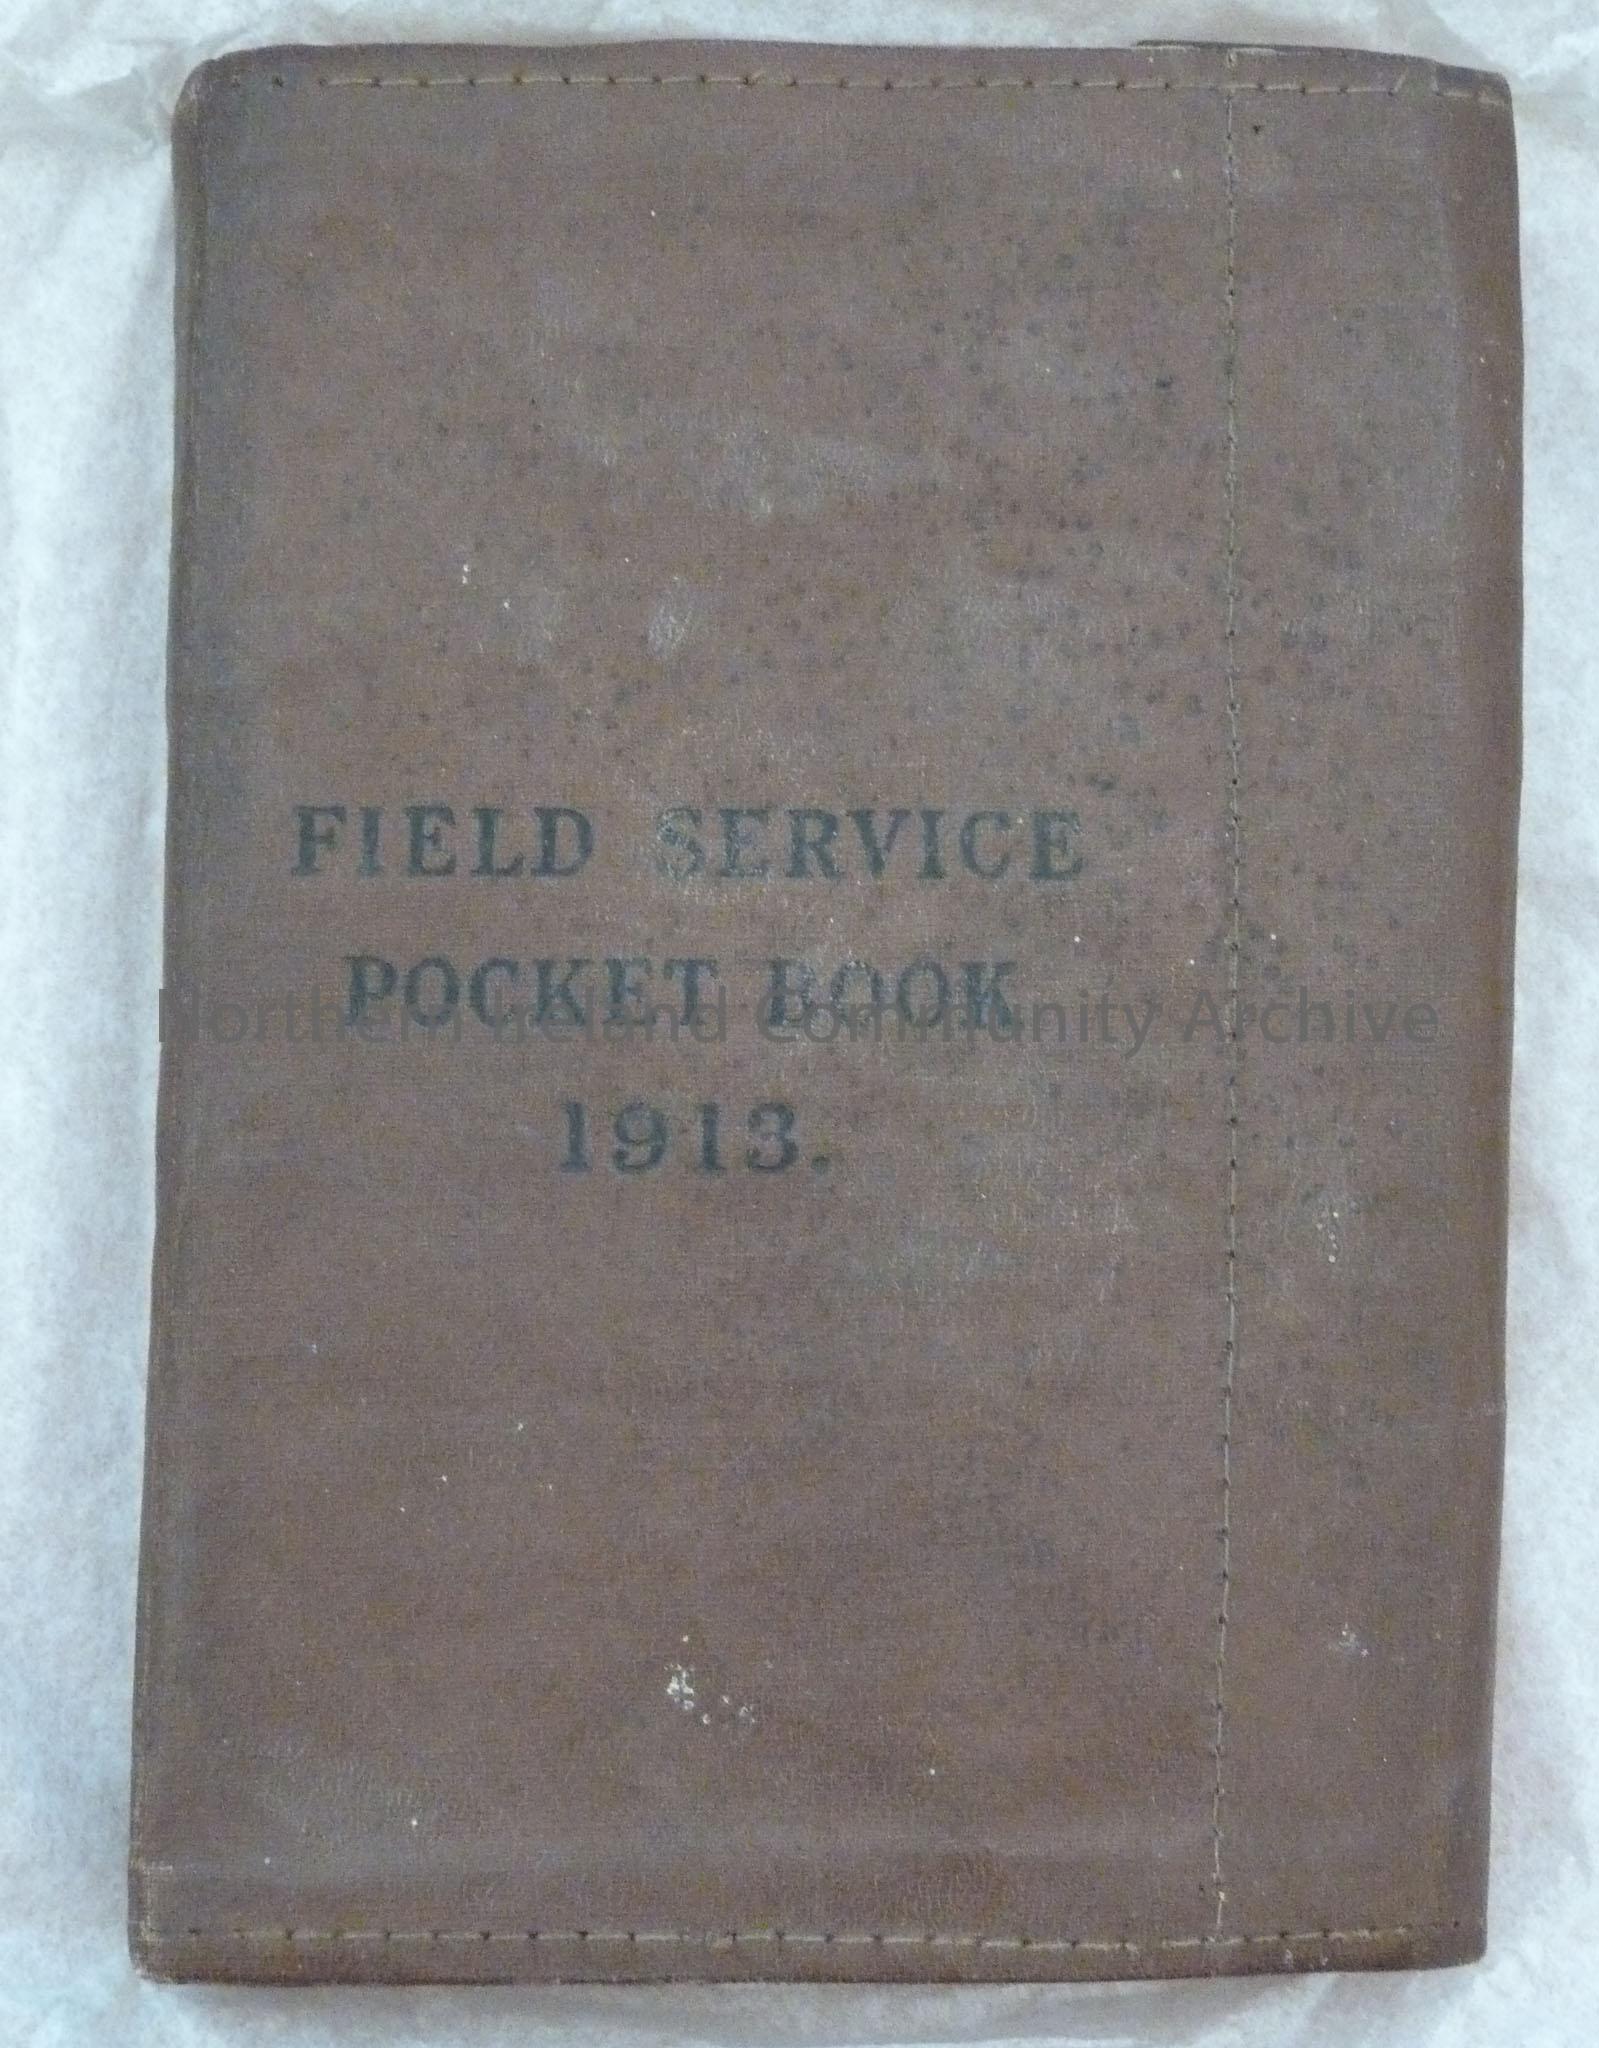 Field Service Pocket Book 1913. Book with brown leather cover.